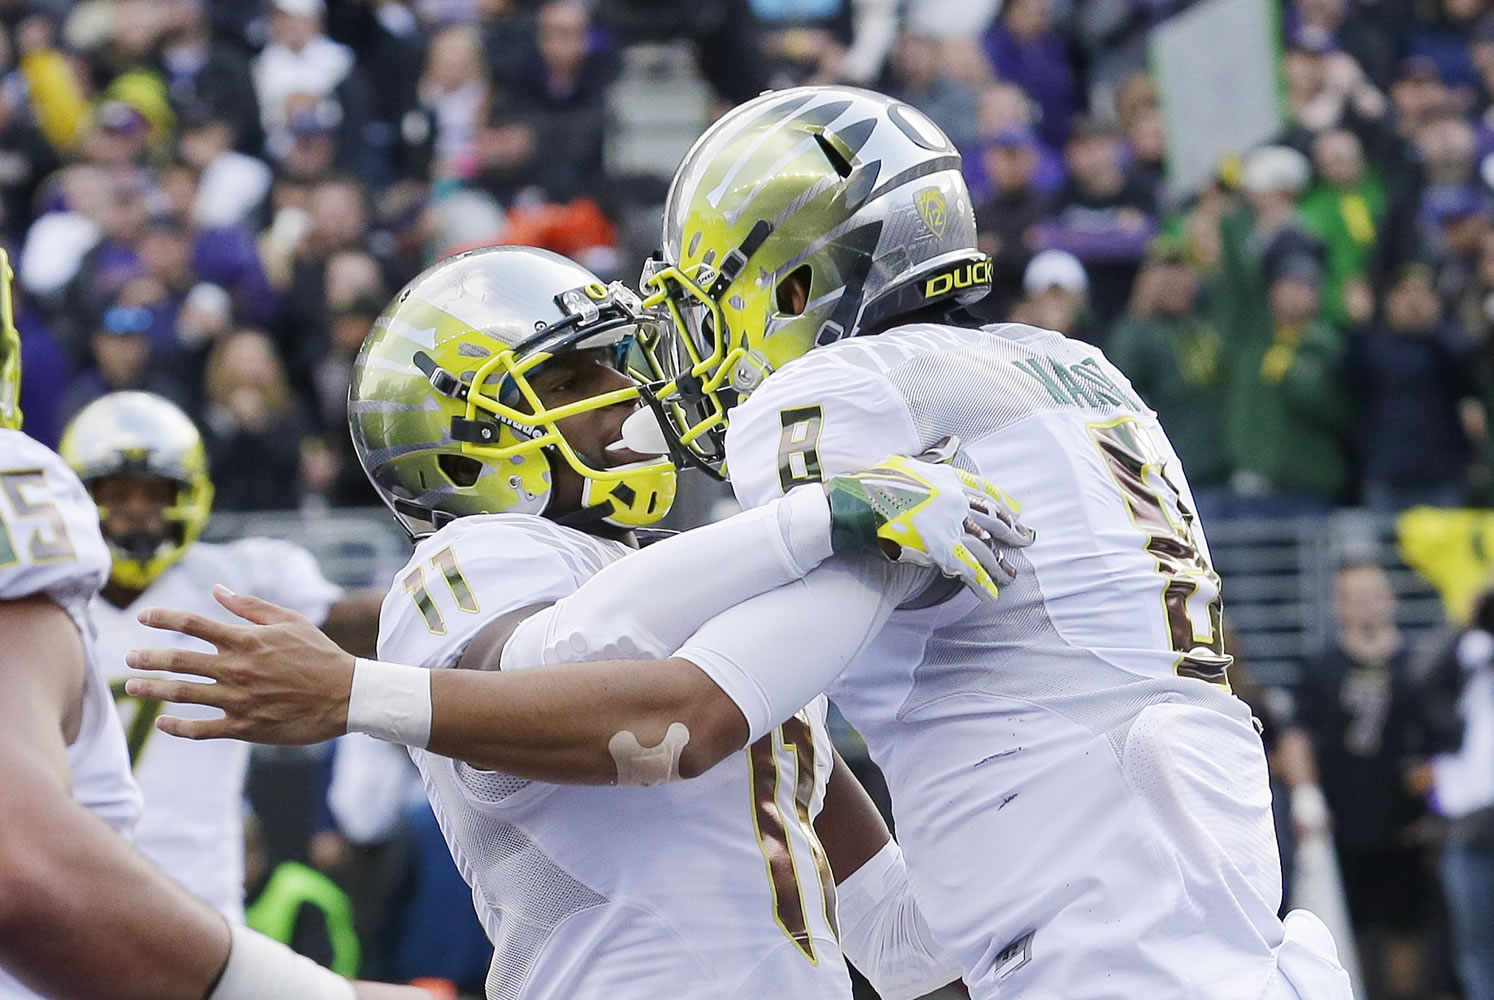 Oregon quarterback Marcus Mariota, right, celebrates with wide receiver Bralon Addison after Mariota scored a touchdown against Washington in the second half of an NCAA college football game, Saturday, Oct. 12, 2013, in Seattle. Oregon won 45-24. (AP Photo/Ted S.